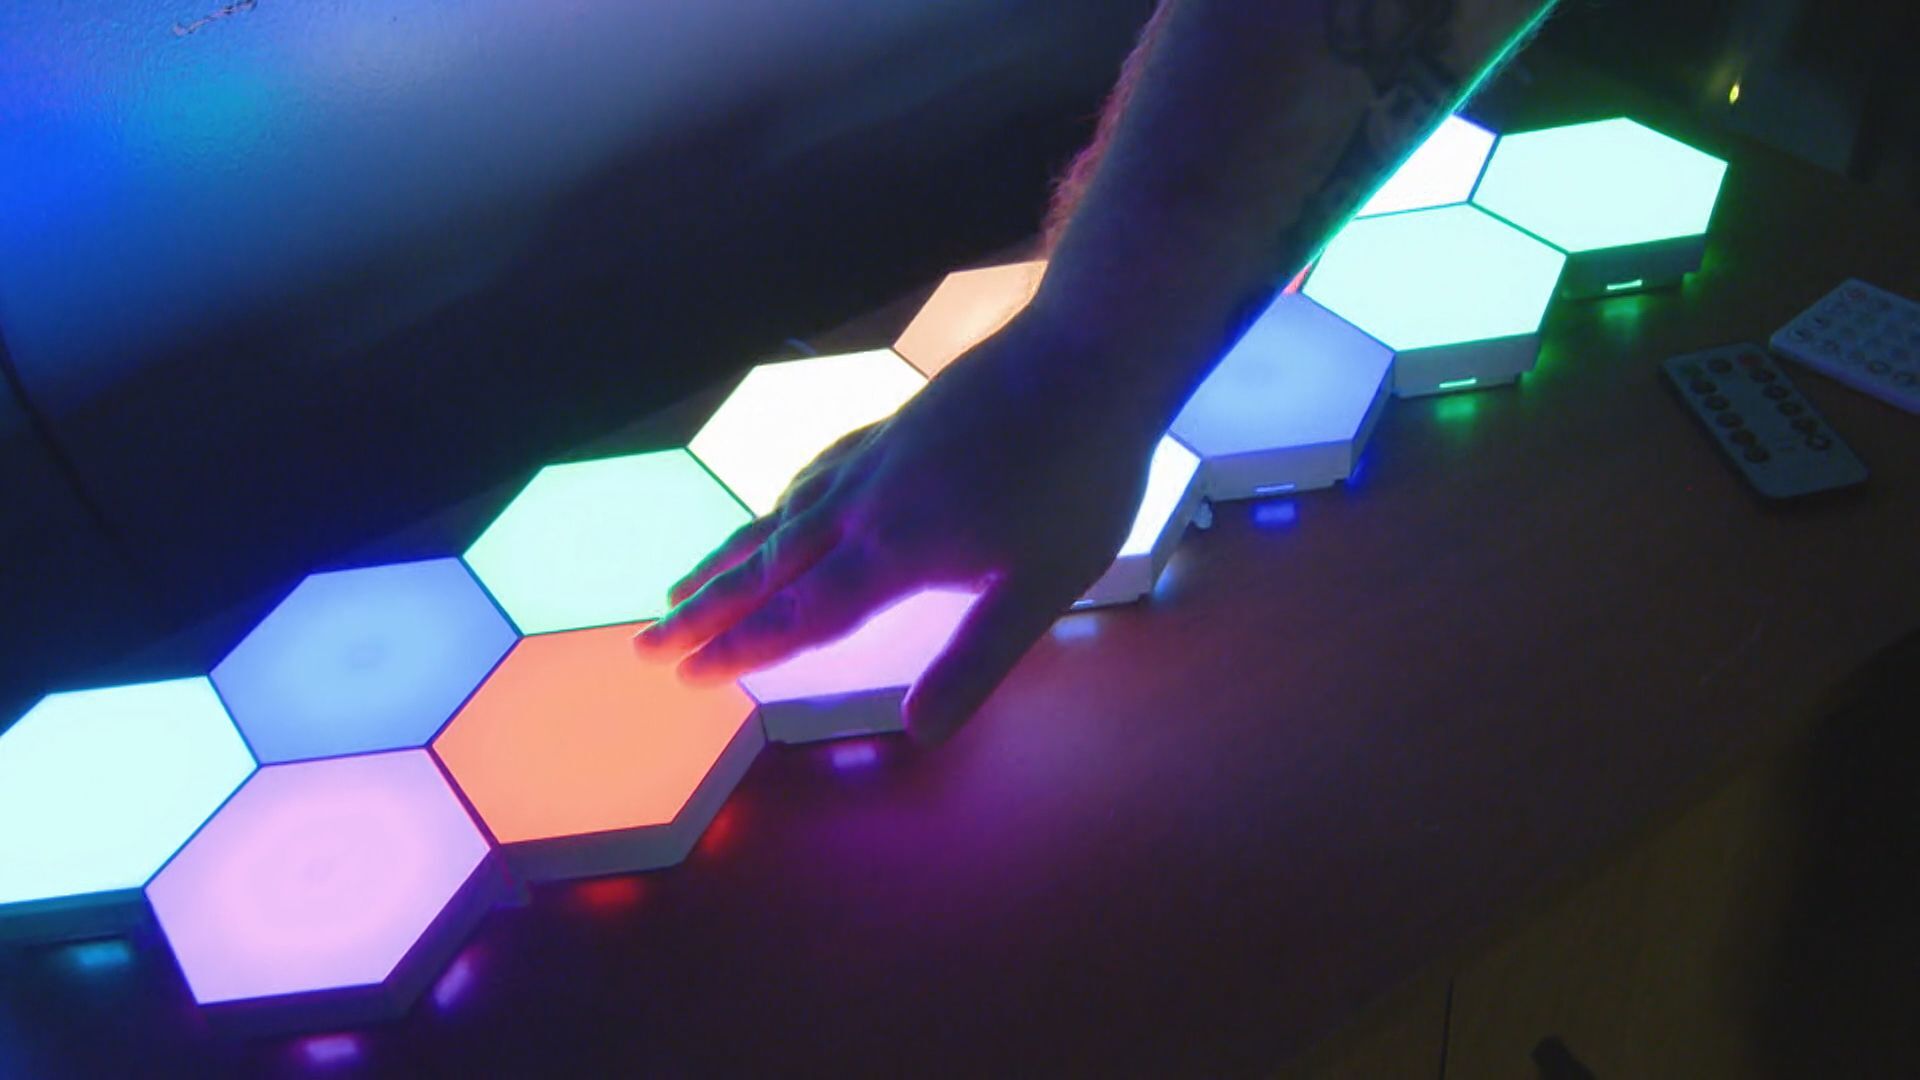 A sensory room for mixed abilities athletes